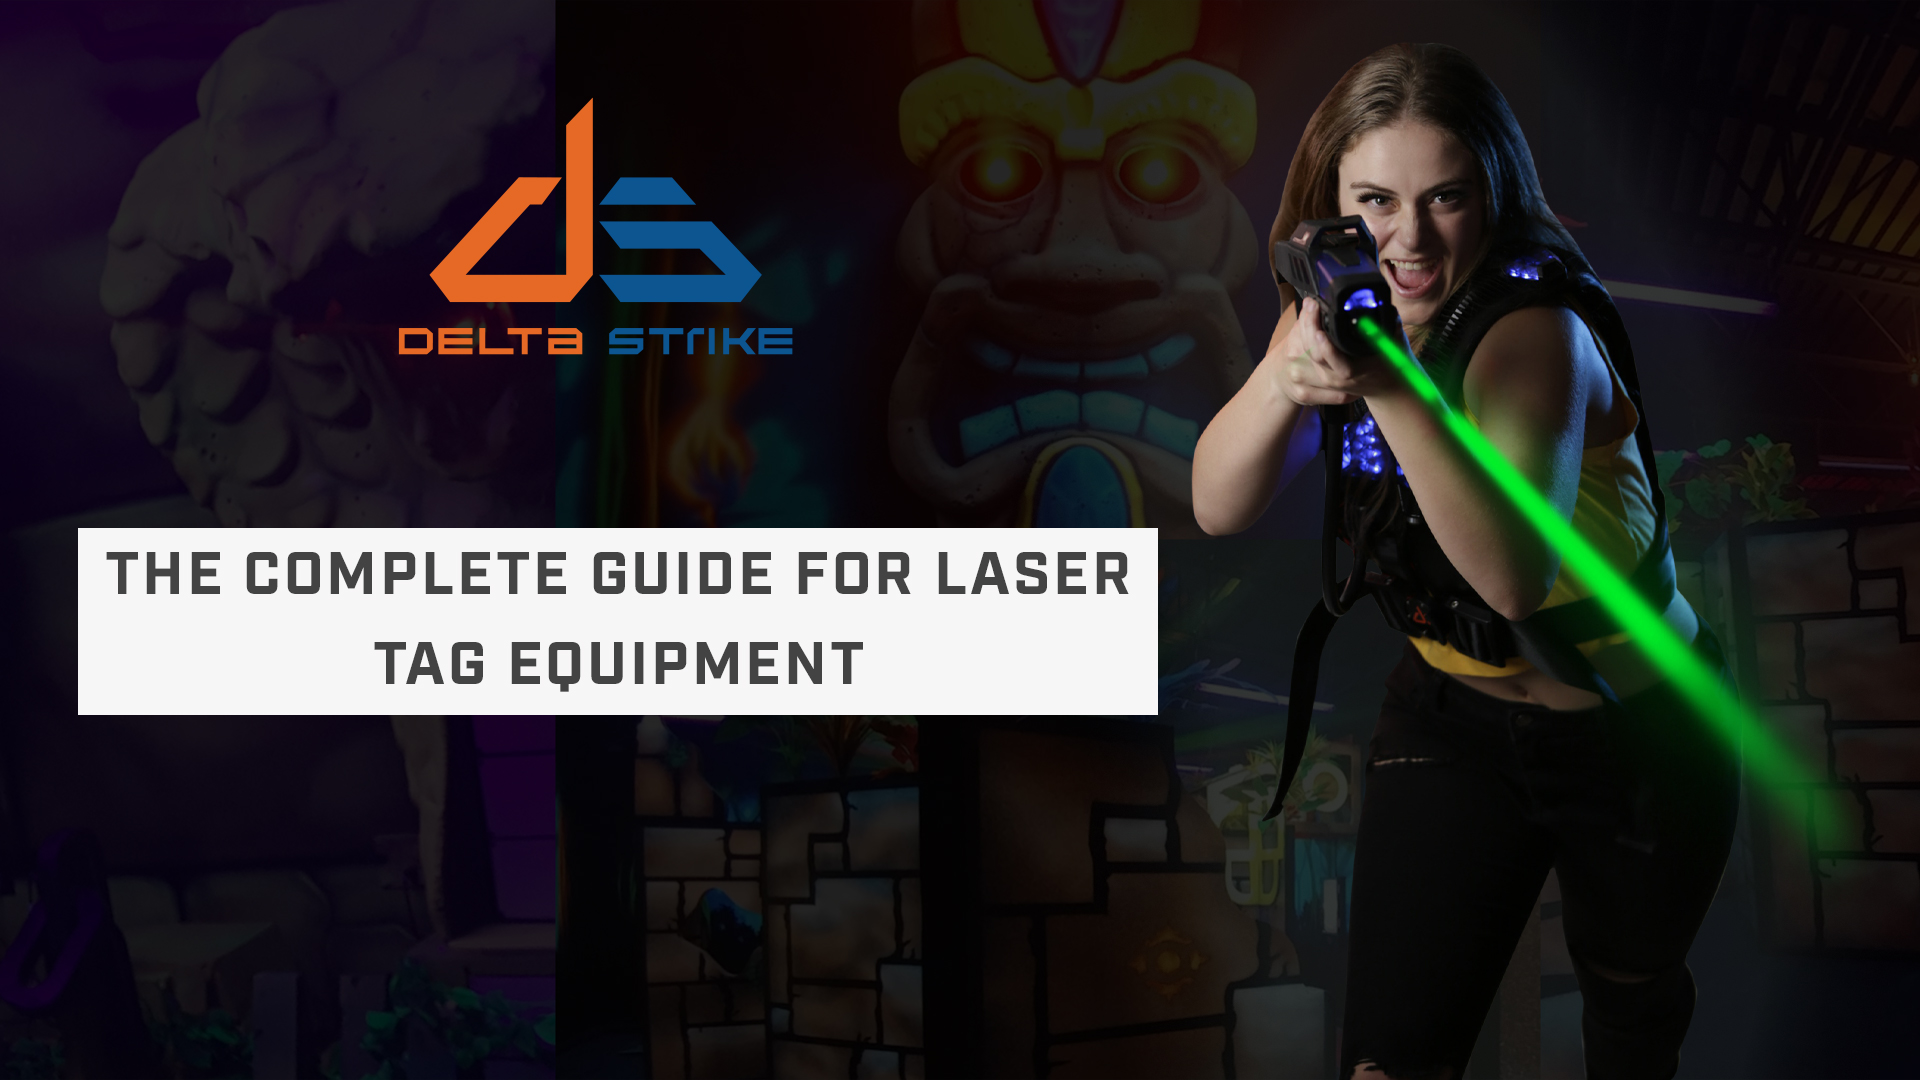 The Complete Guide for Laser Tag Equipment